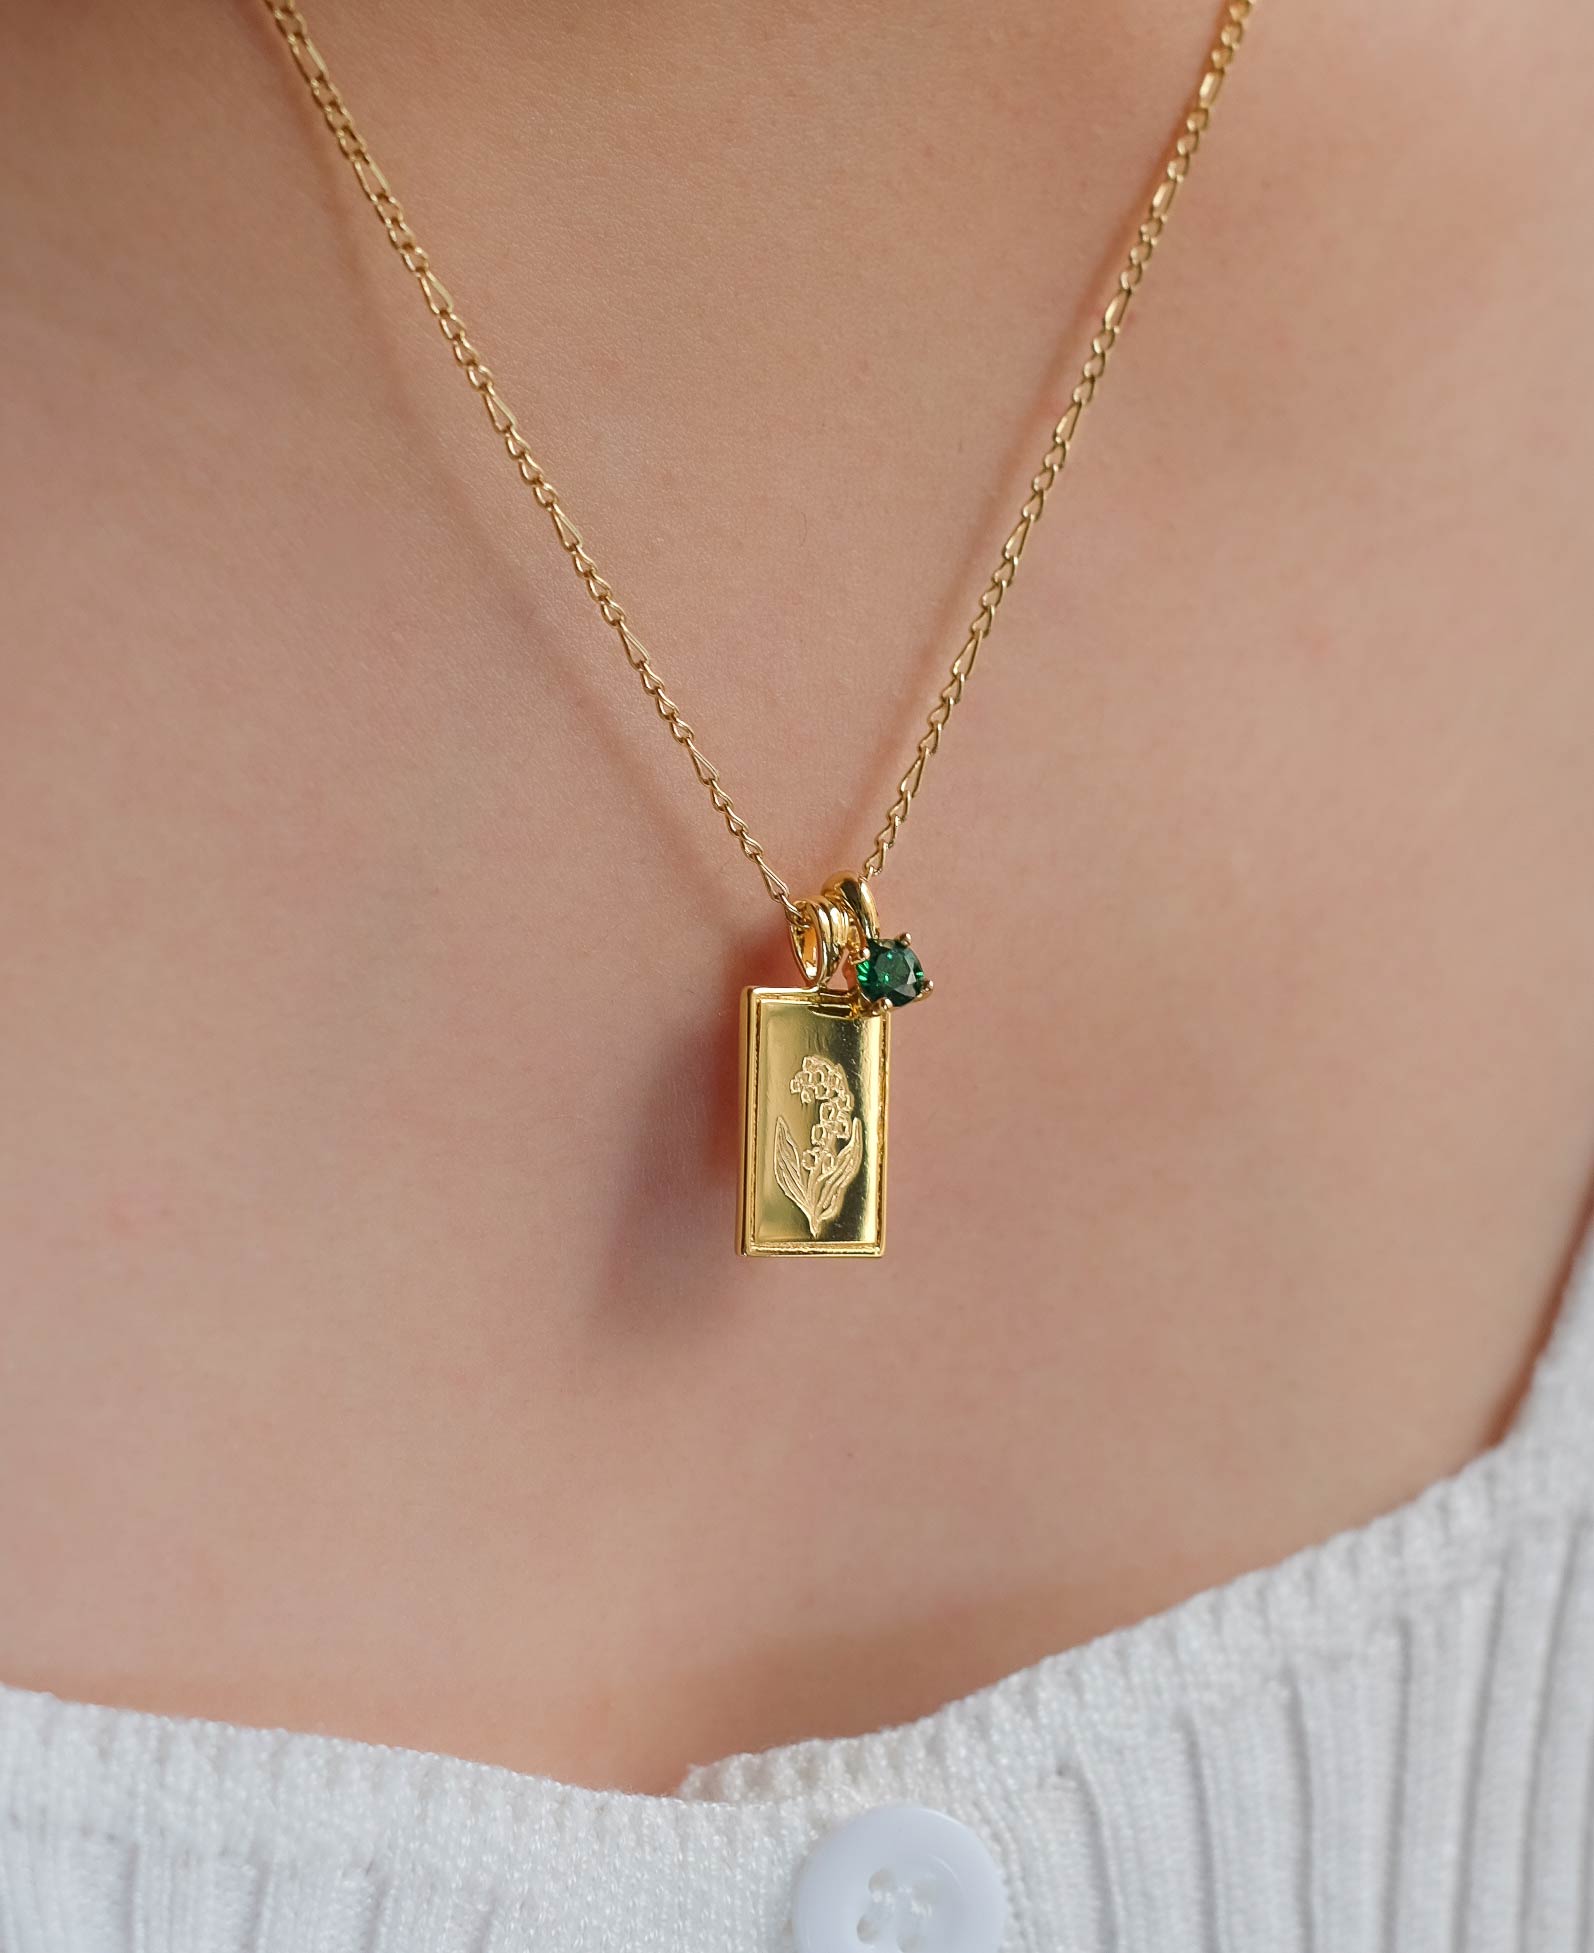 May - Lily of the Valley Birth Flower Pendant Necklace